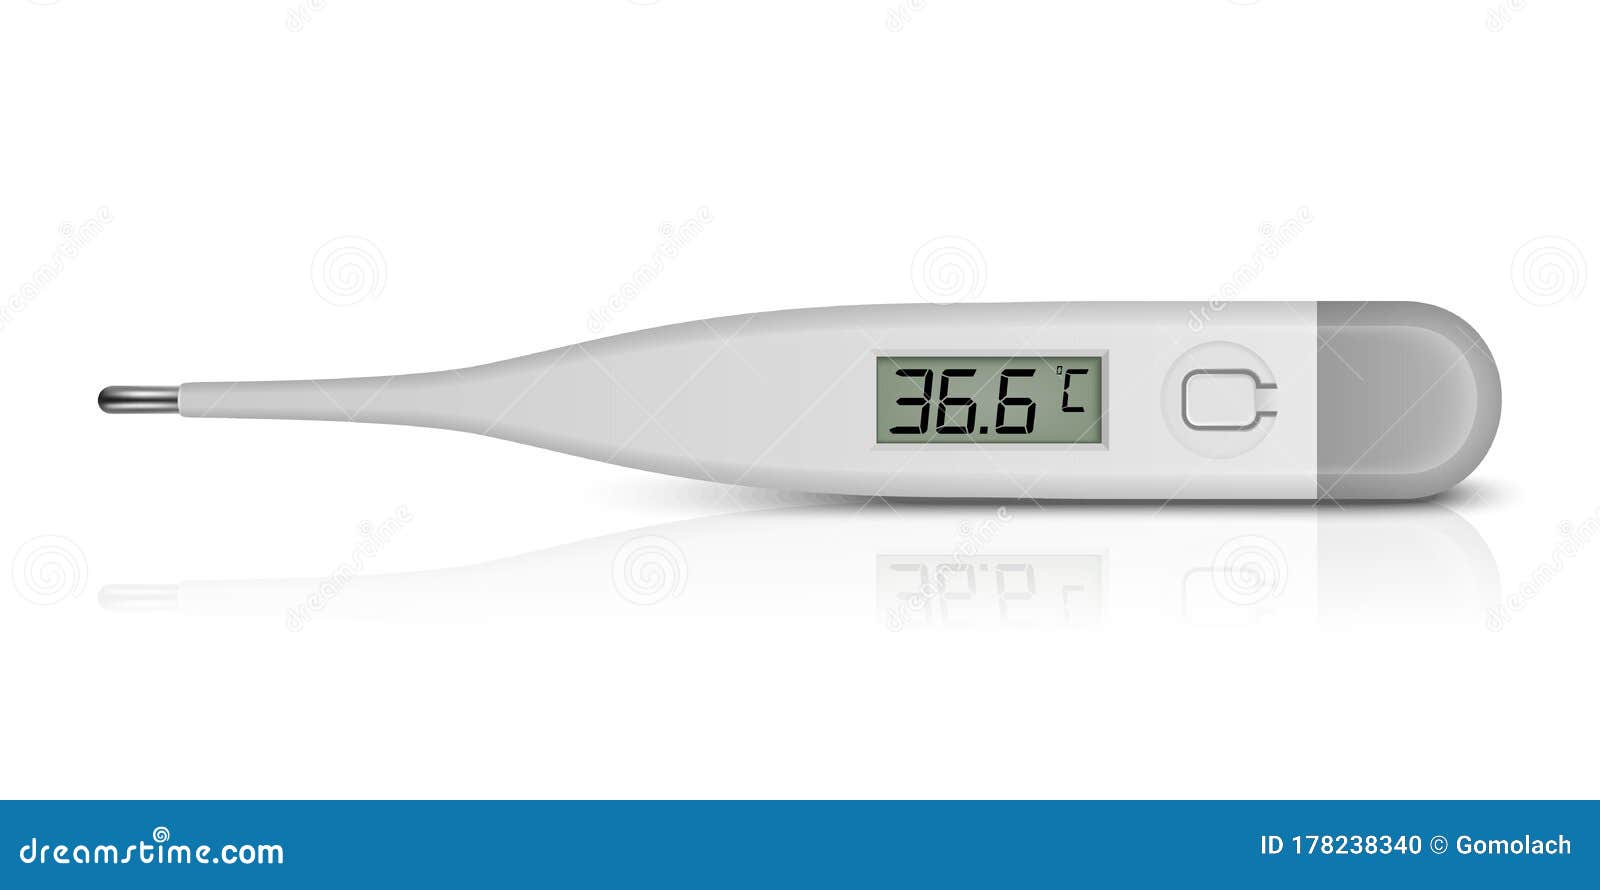 https://thumbs.dreamstime.com/z/vector-realistic-d-celsius-electronic-medical-thermometer-measuring-icon-closeup-isolated-white-background-design-template-178238340.jpg